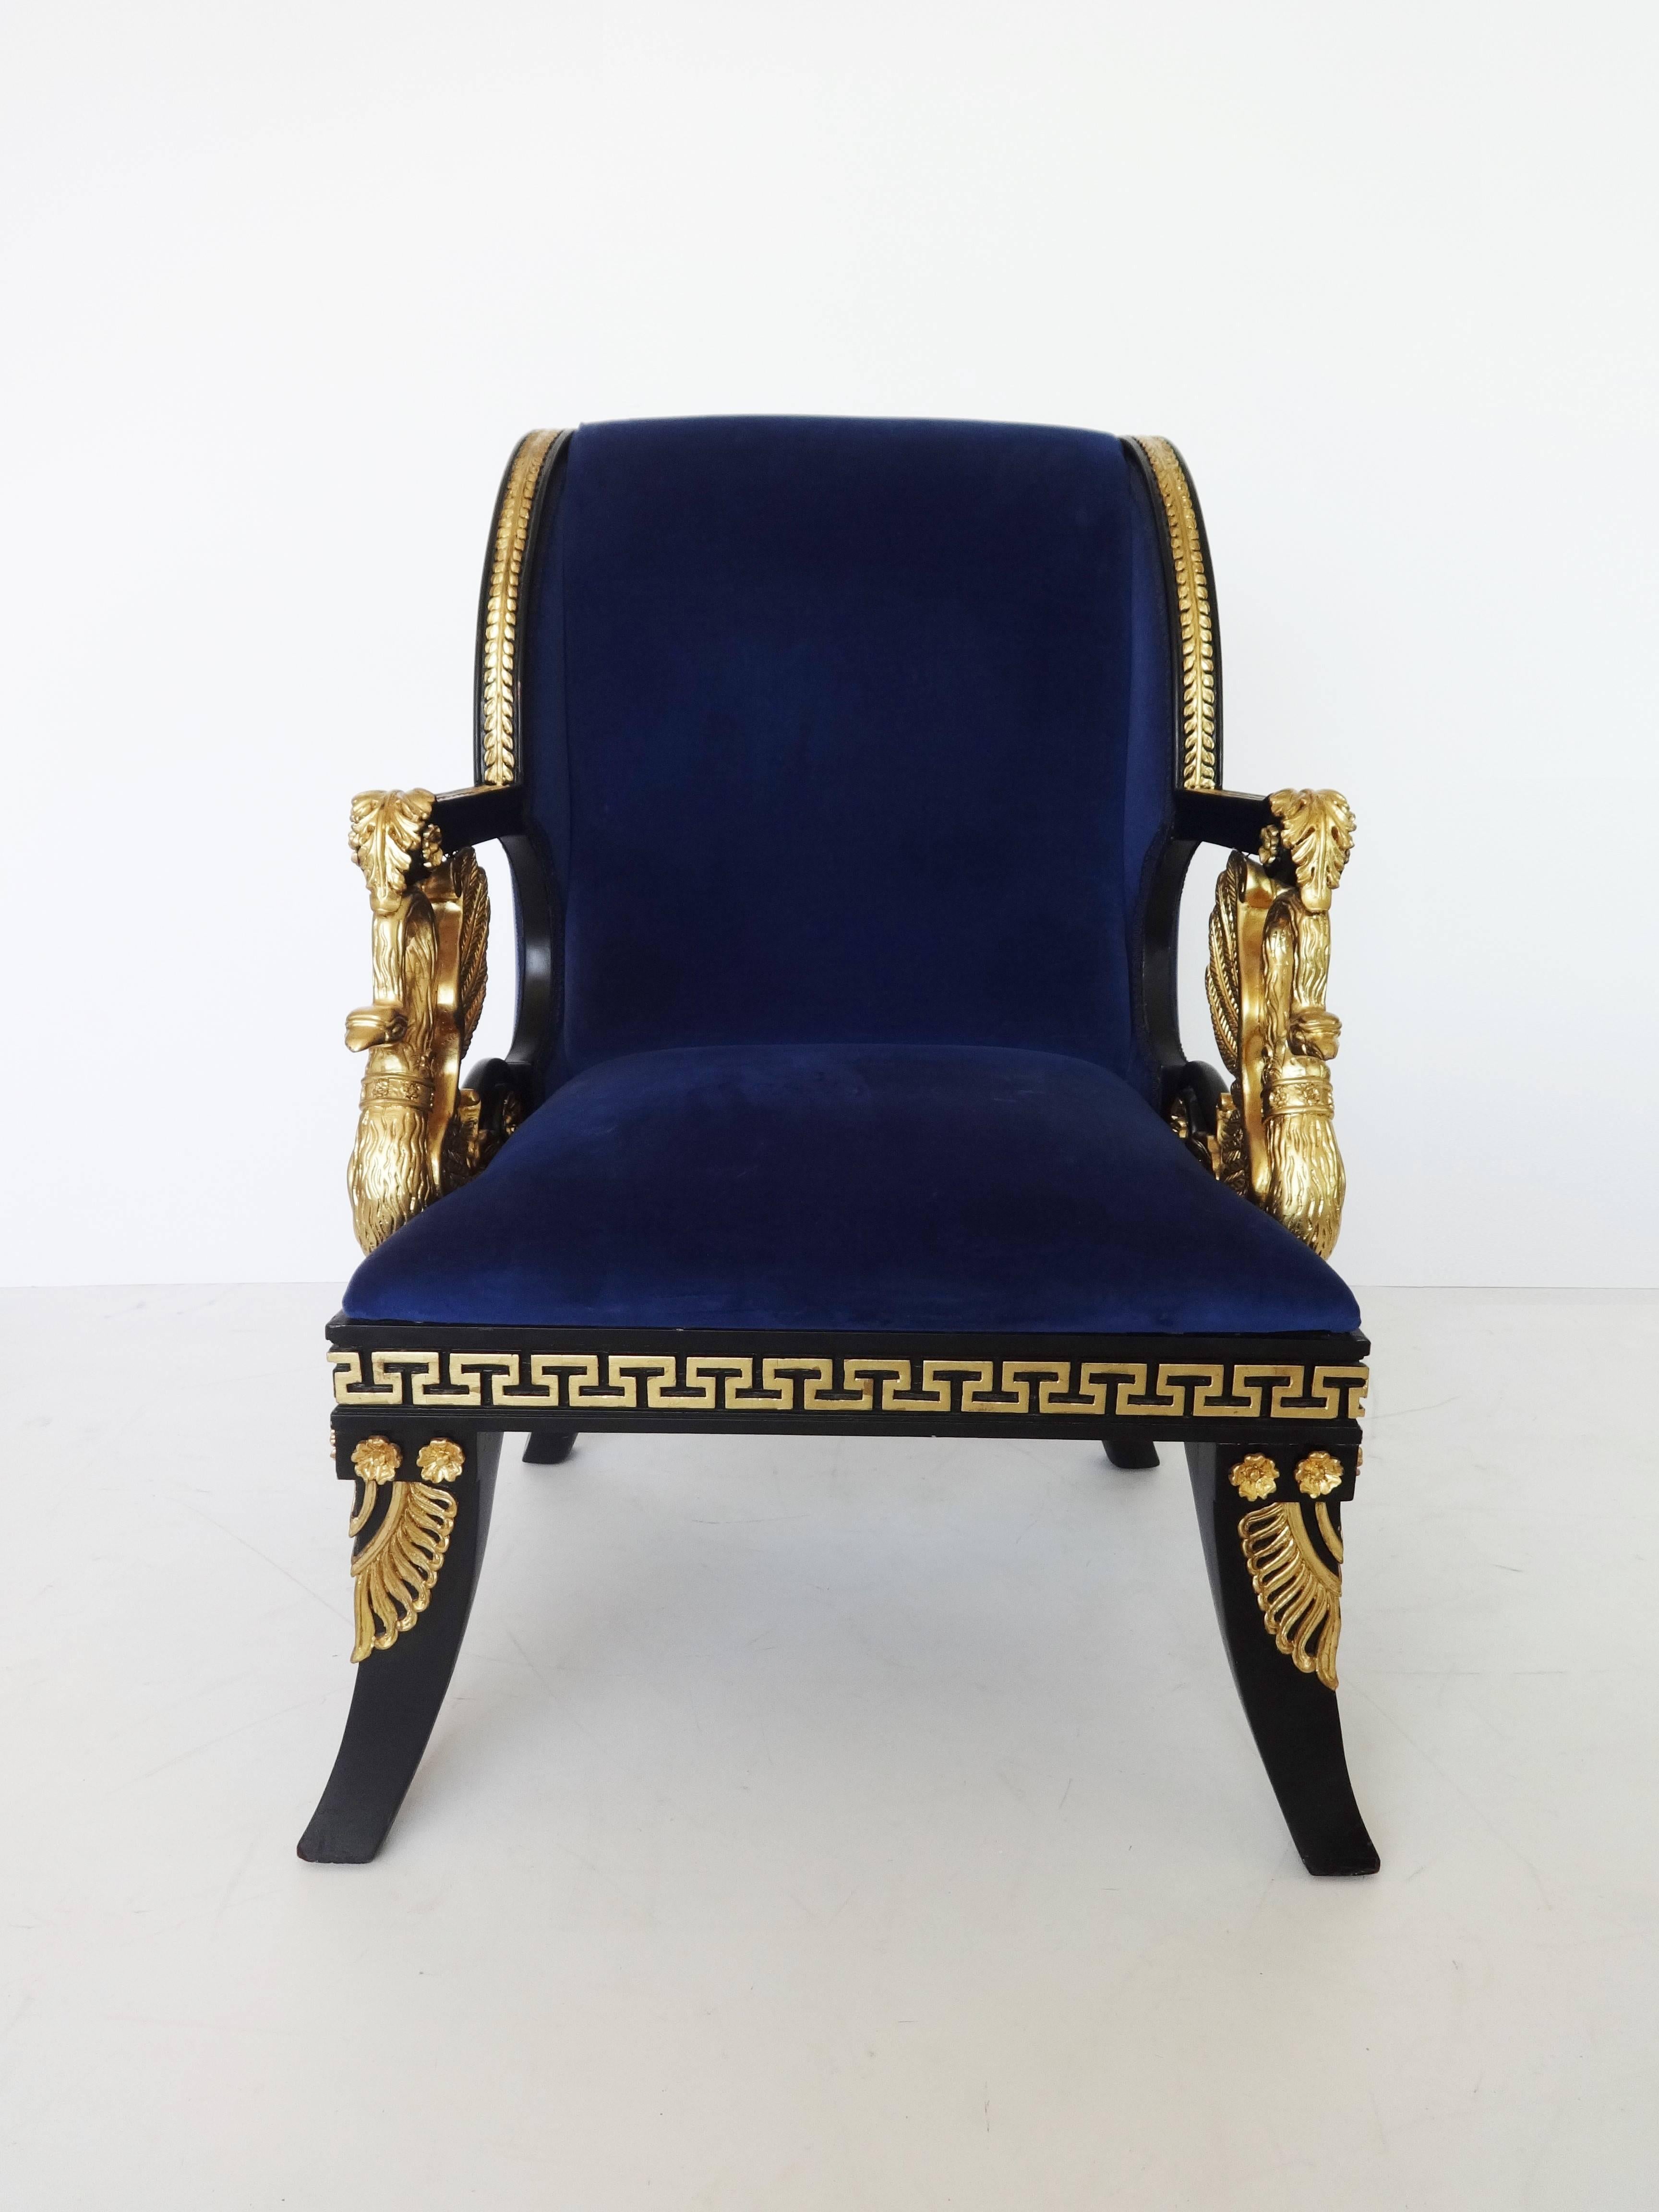 Upholstery Fine Pair of Italian Neoclassical Lacquered and Gilt Armchairs For Sale